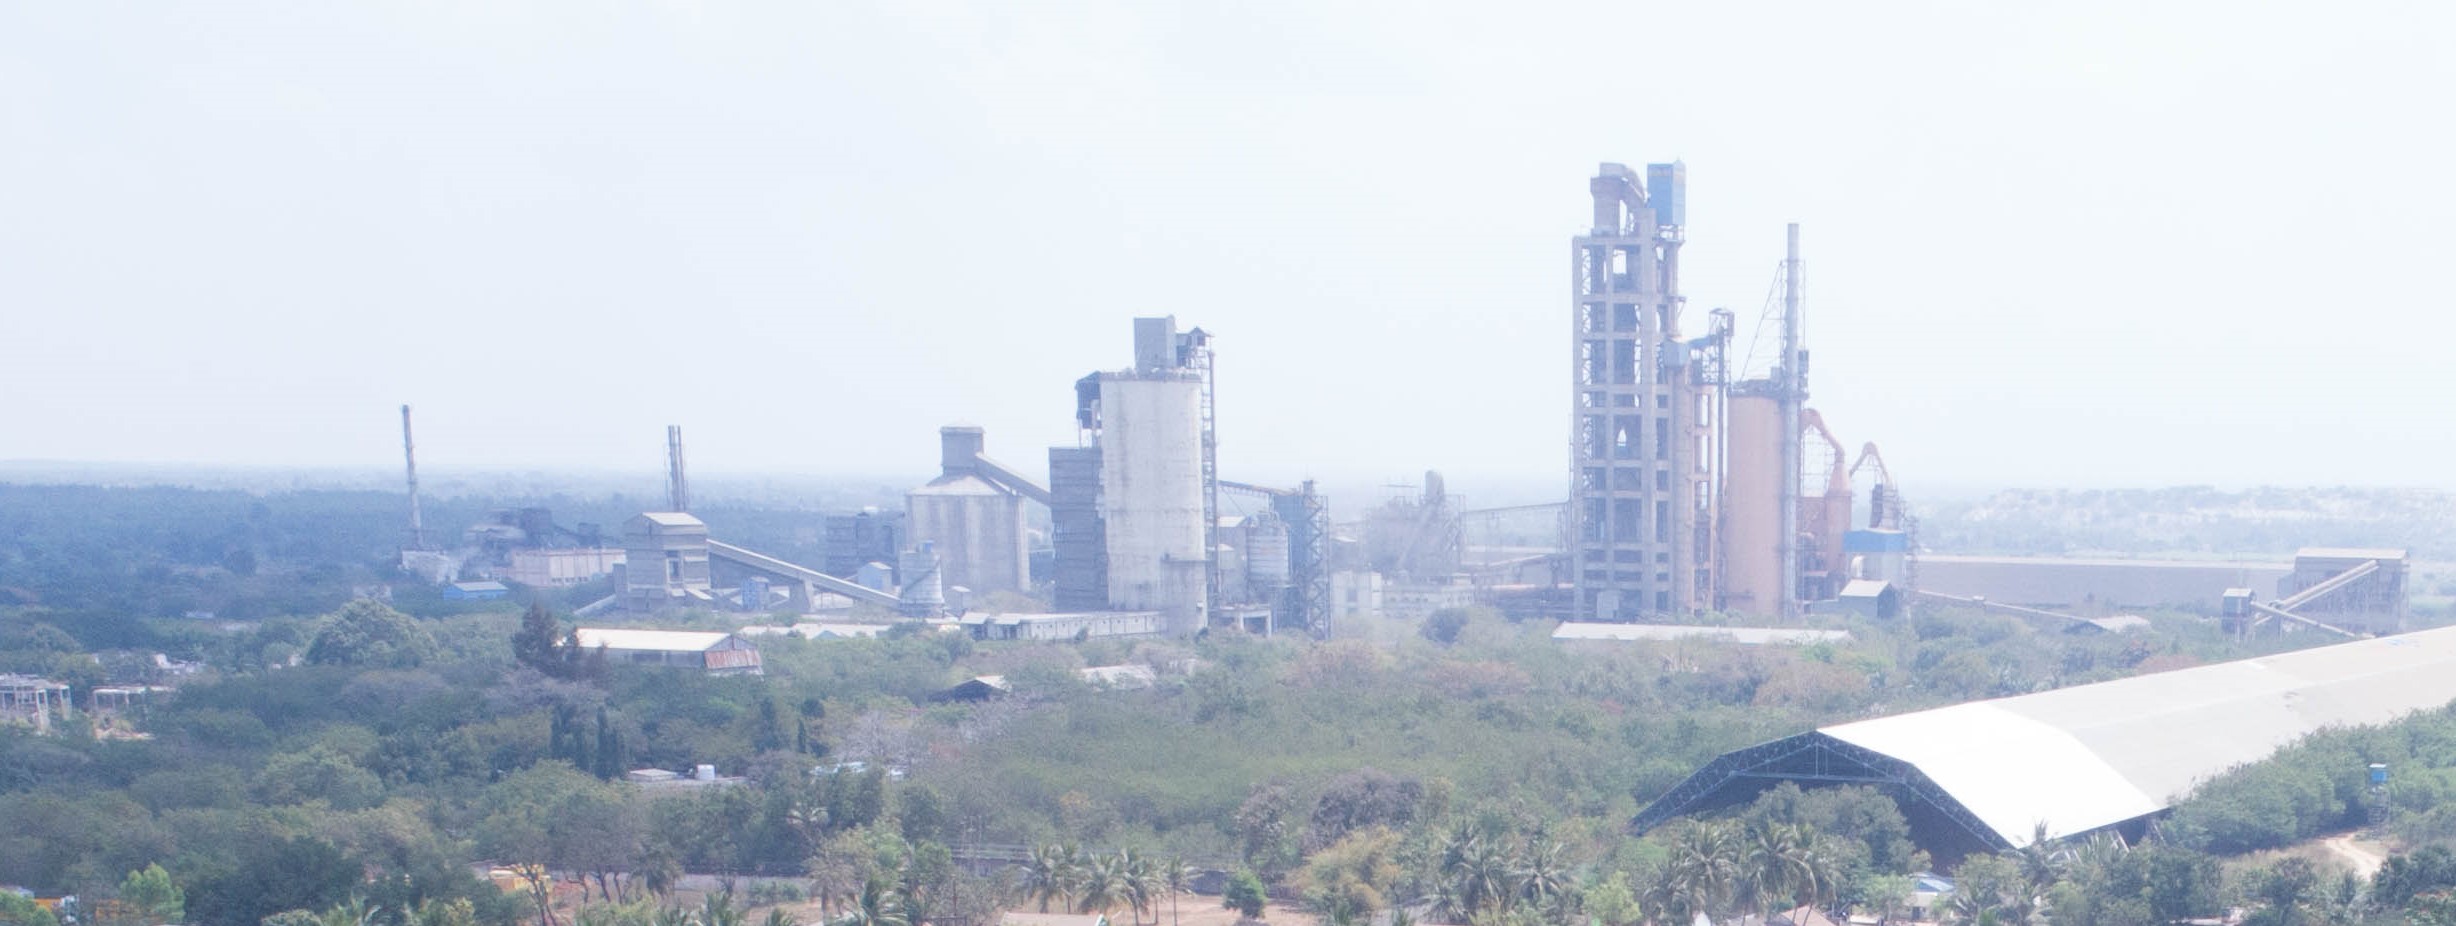 Reddipalayam Cement Works, UltraTech Cement’s integrated unit located in Tamil Nadu, has achieved the distinction of one-fourth of its fuel (heat) requirement being met through utilisation of waste materials sourced from local municipal corporations and industries. With the increased usage of alternative fuels, Reddipalayam Cement Works is now 16.25 times plastic positive. The unit has also successfully reduced CO2 emission by 2,250 tonne CO2 per annum.   